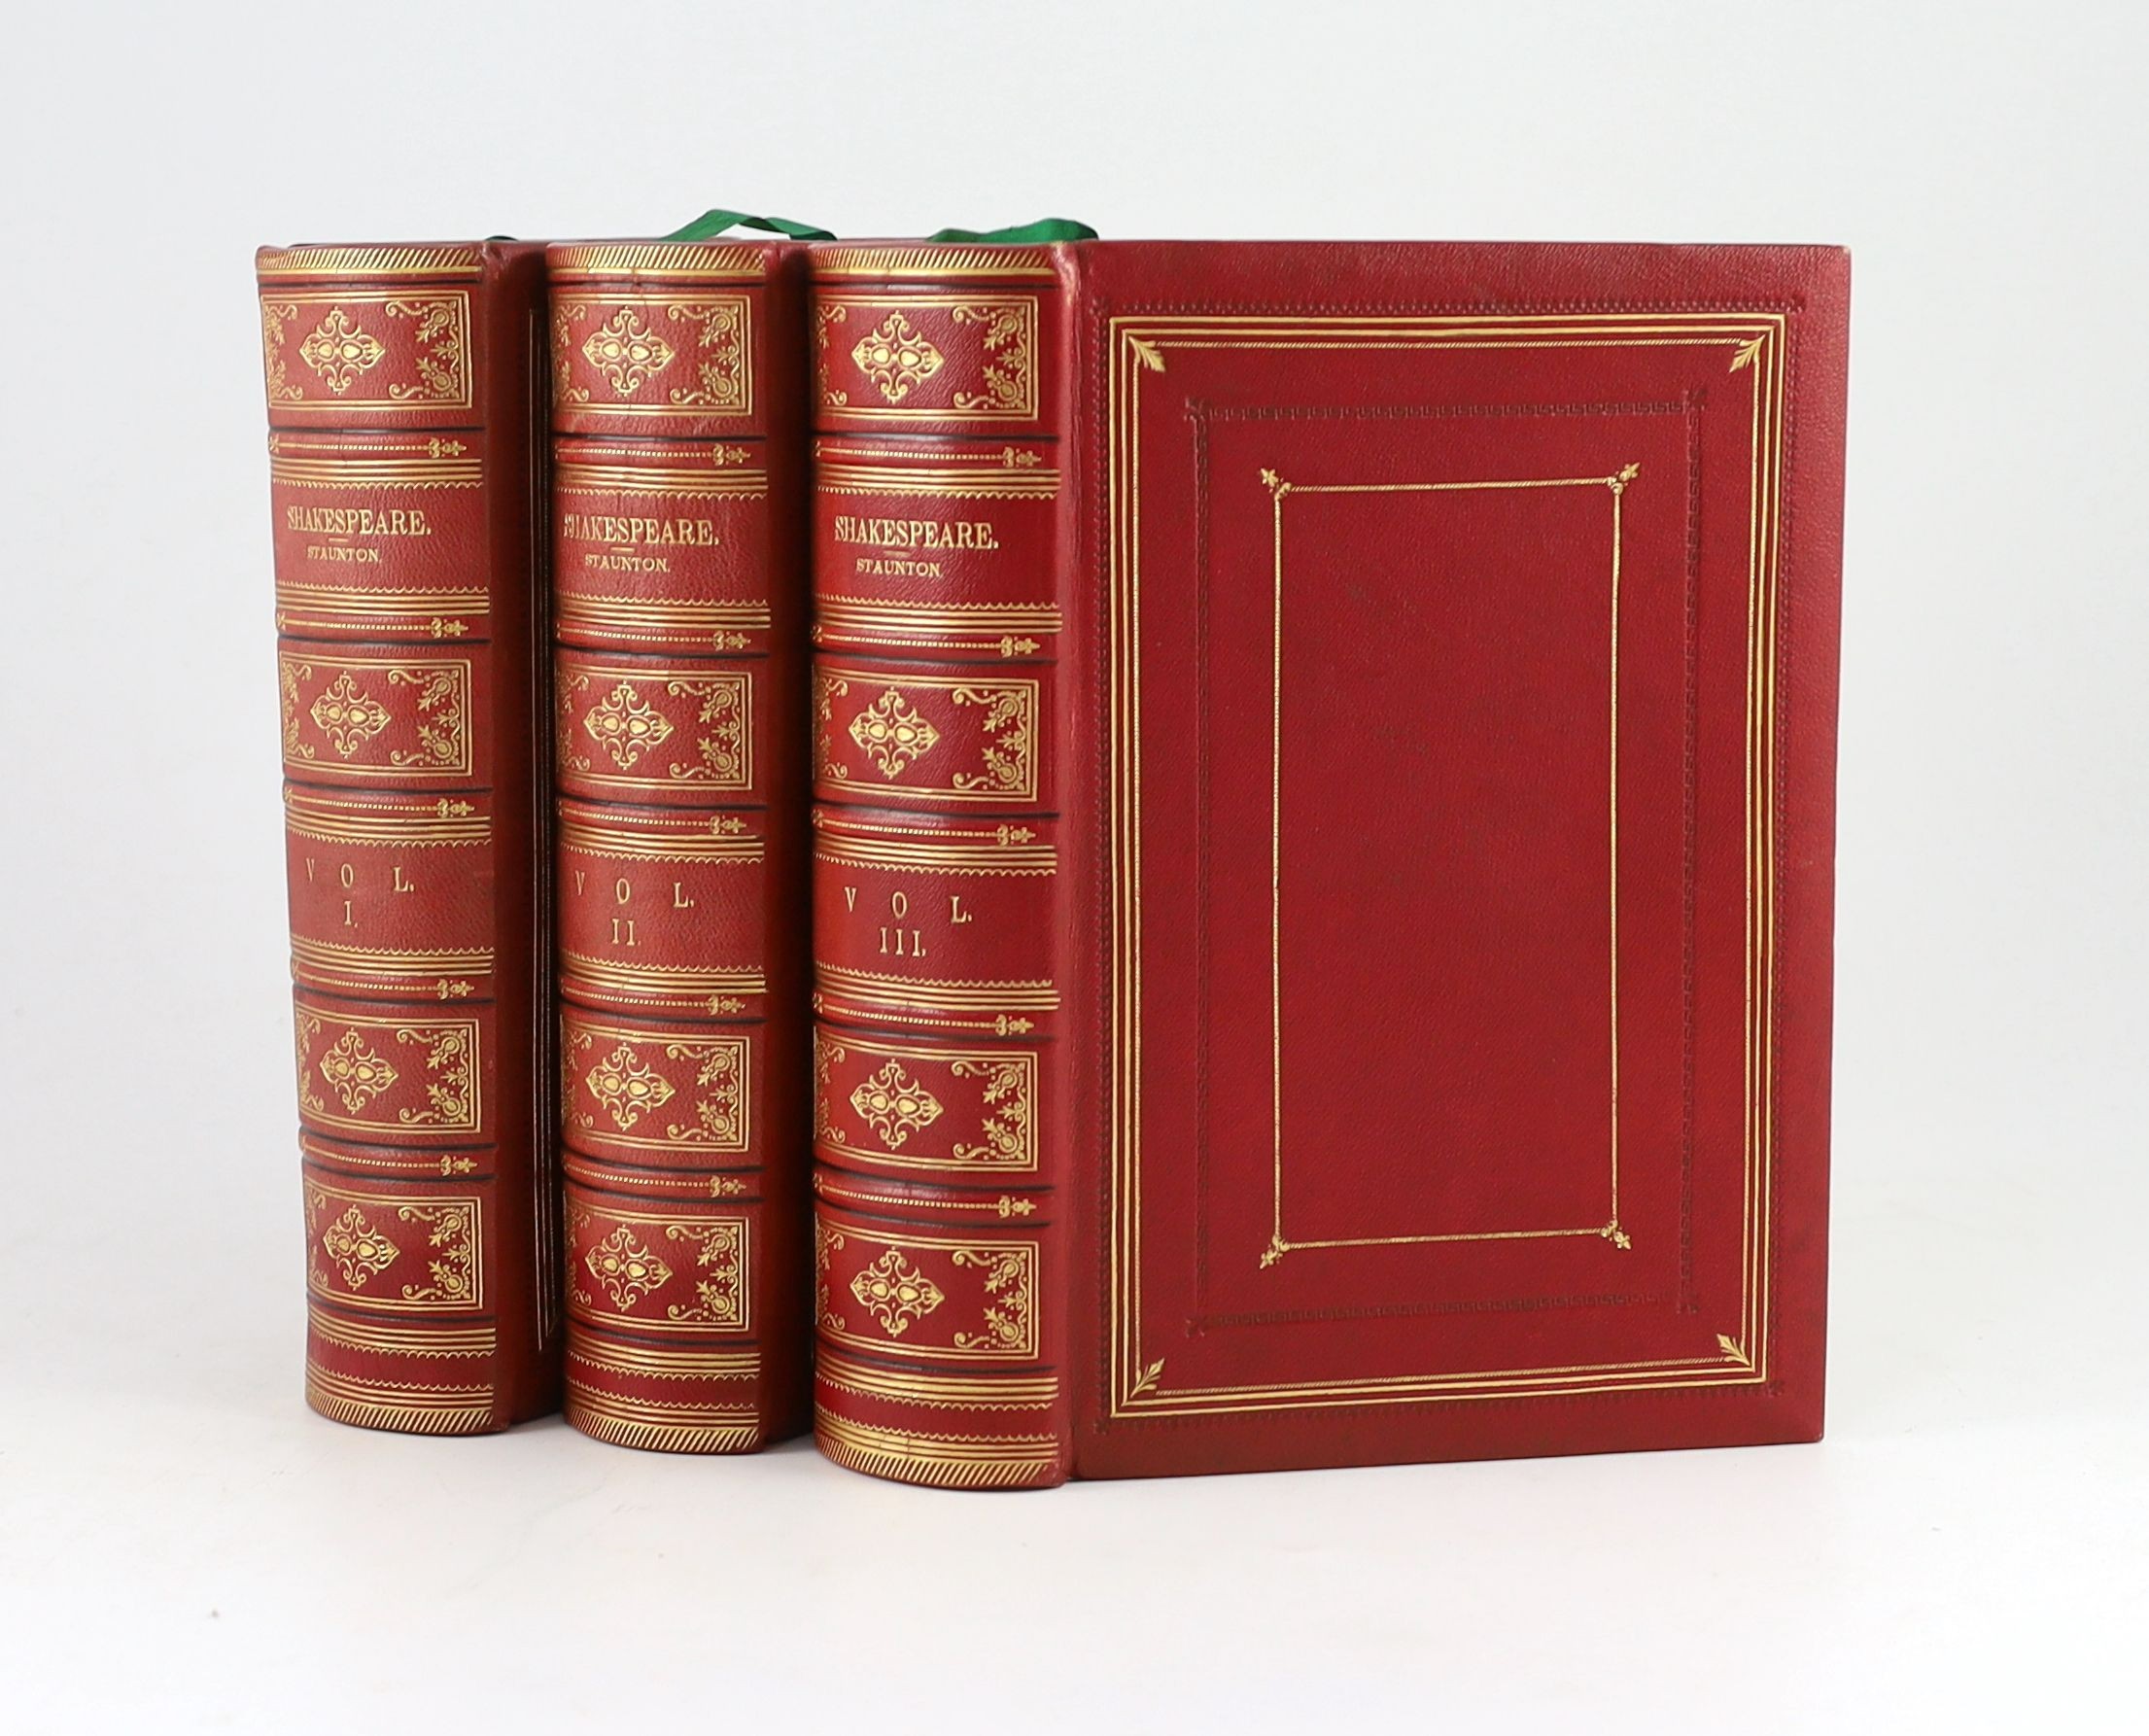 Shakespeare, William - The Works of Shakespeare, edited by Howard Staunton, 3 vols, 4to, red morocco gilt, with illustrations by Sir John Gilbert, A.R.A., engraved by the brothers Dalziel, George Routledge and Sons, Lond